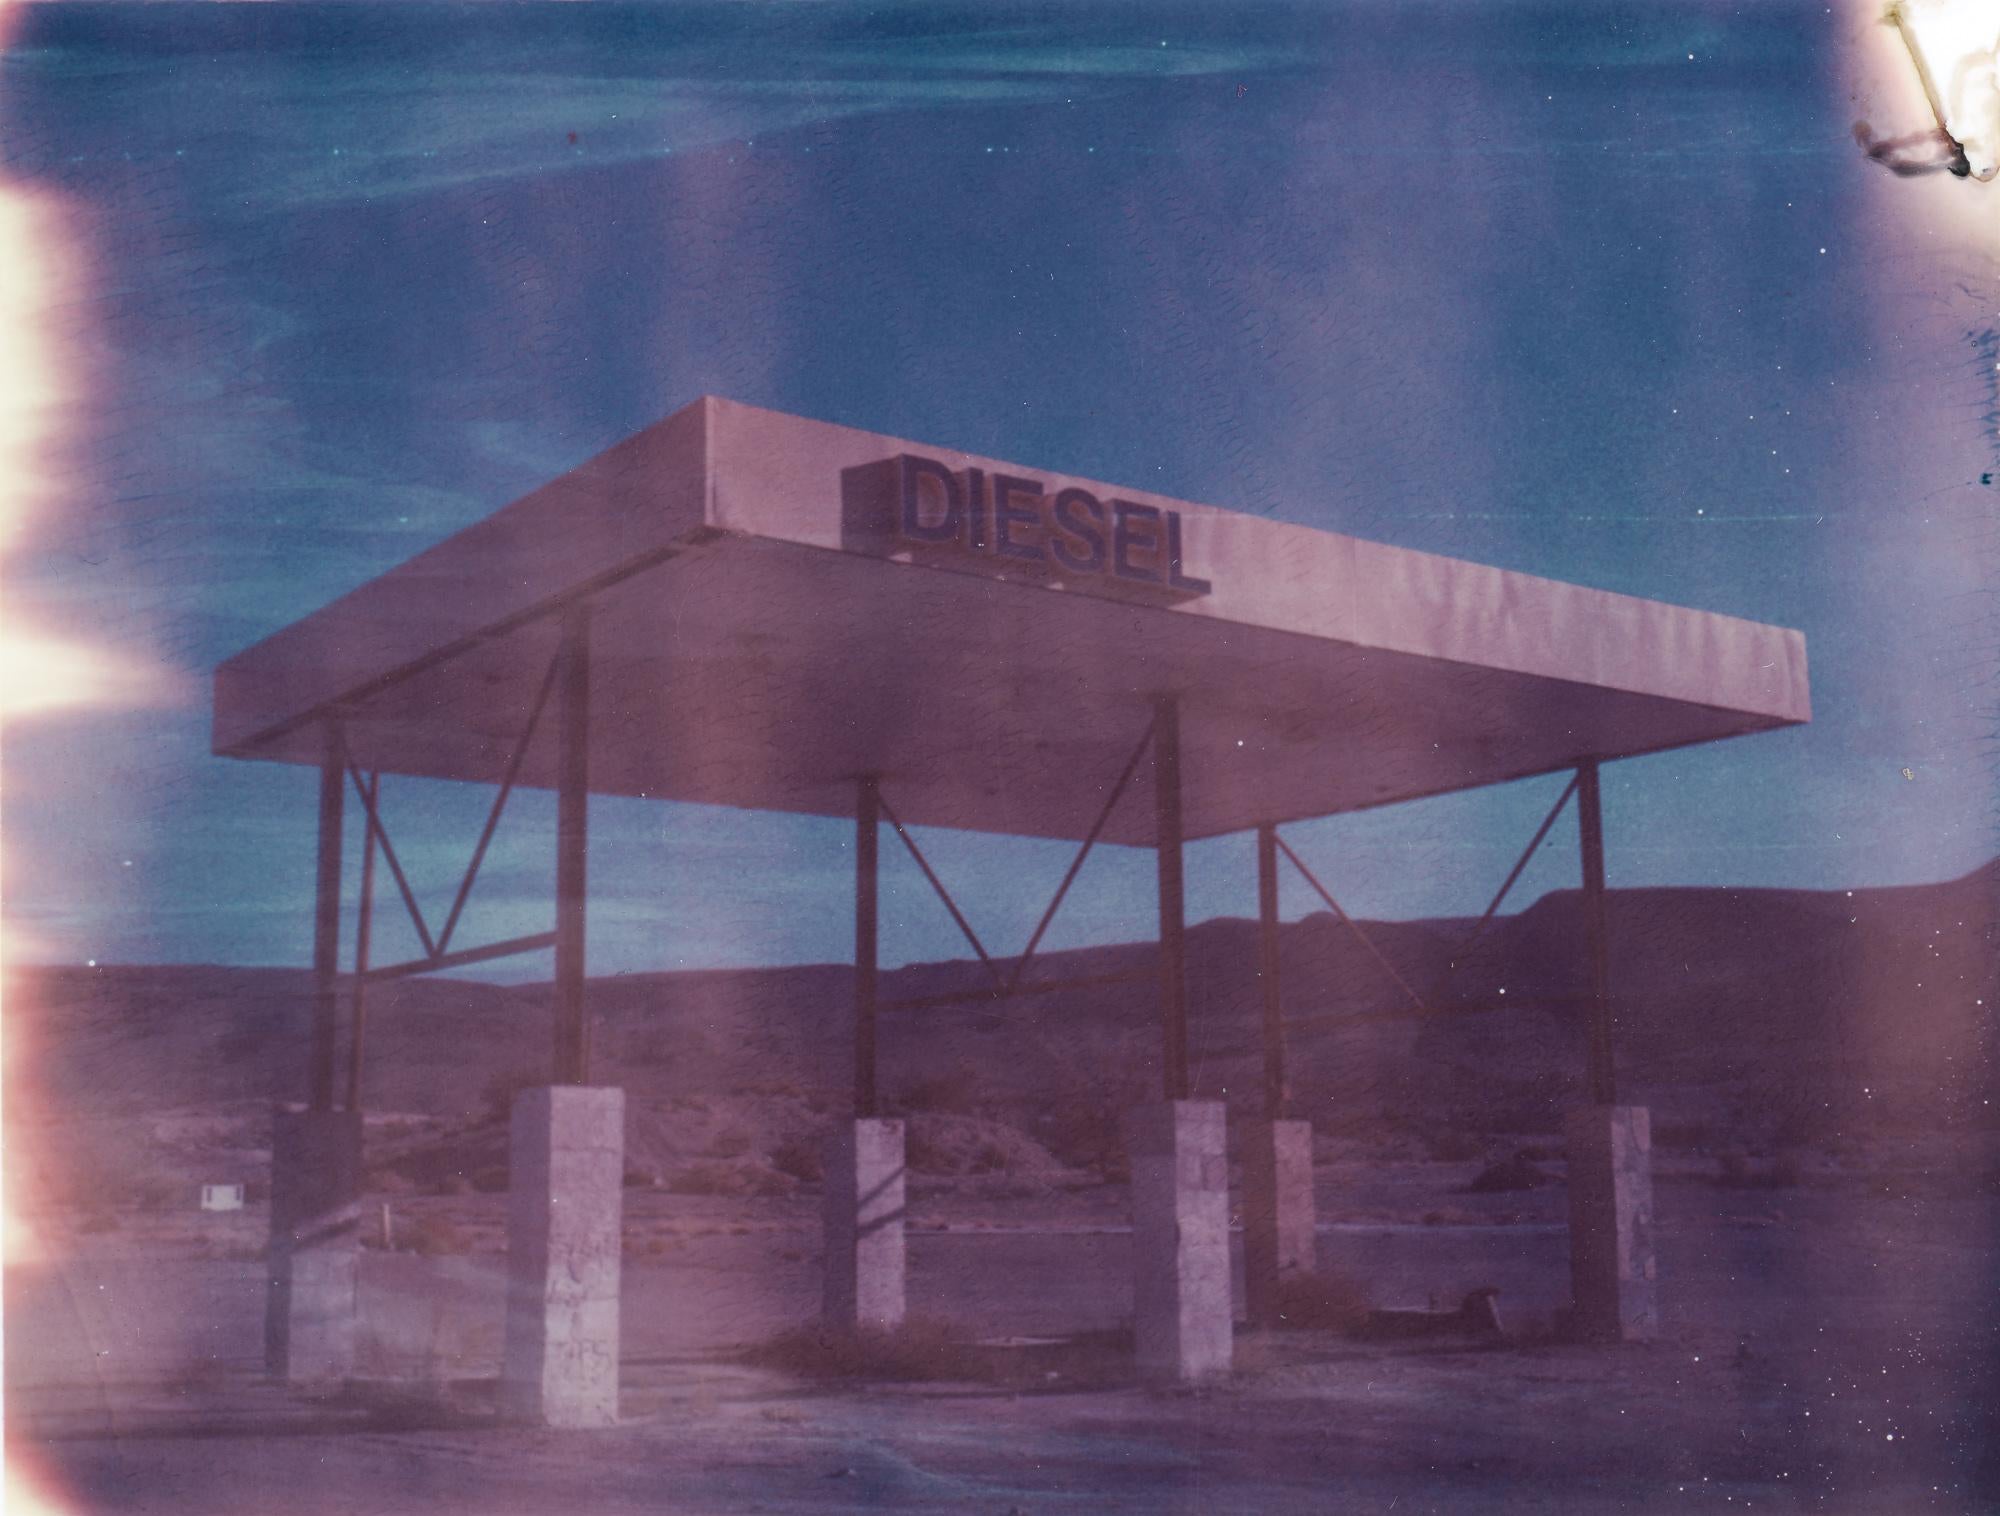 Diesel - 2018

48x60cm, 
Edition of 7 plus 2 Artist Proofs. 
Archival C-Print based on the original Polaroid. 
Signature label with certificate. 
Artist inventory PL2018 - 414.
Not mounted. 

Kirsten Thys van den Audenaerde is a self-taught